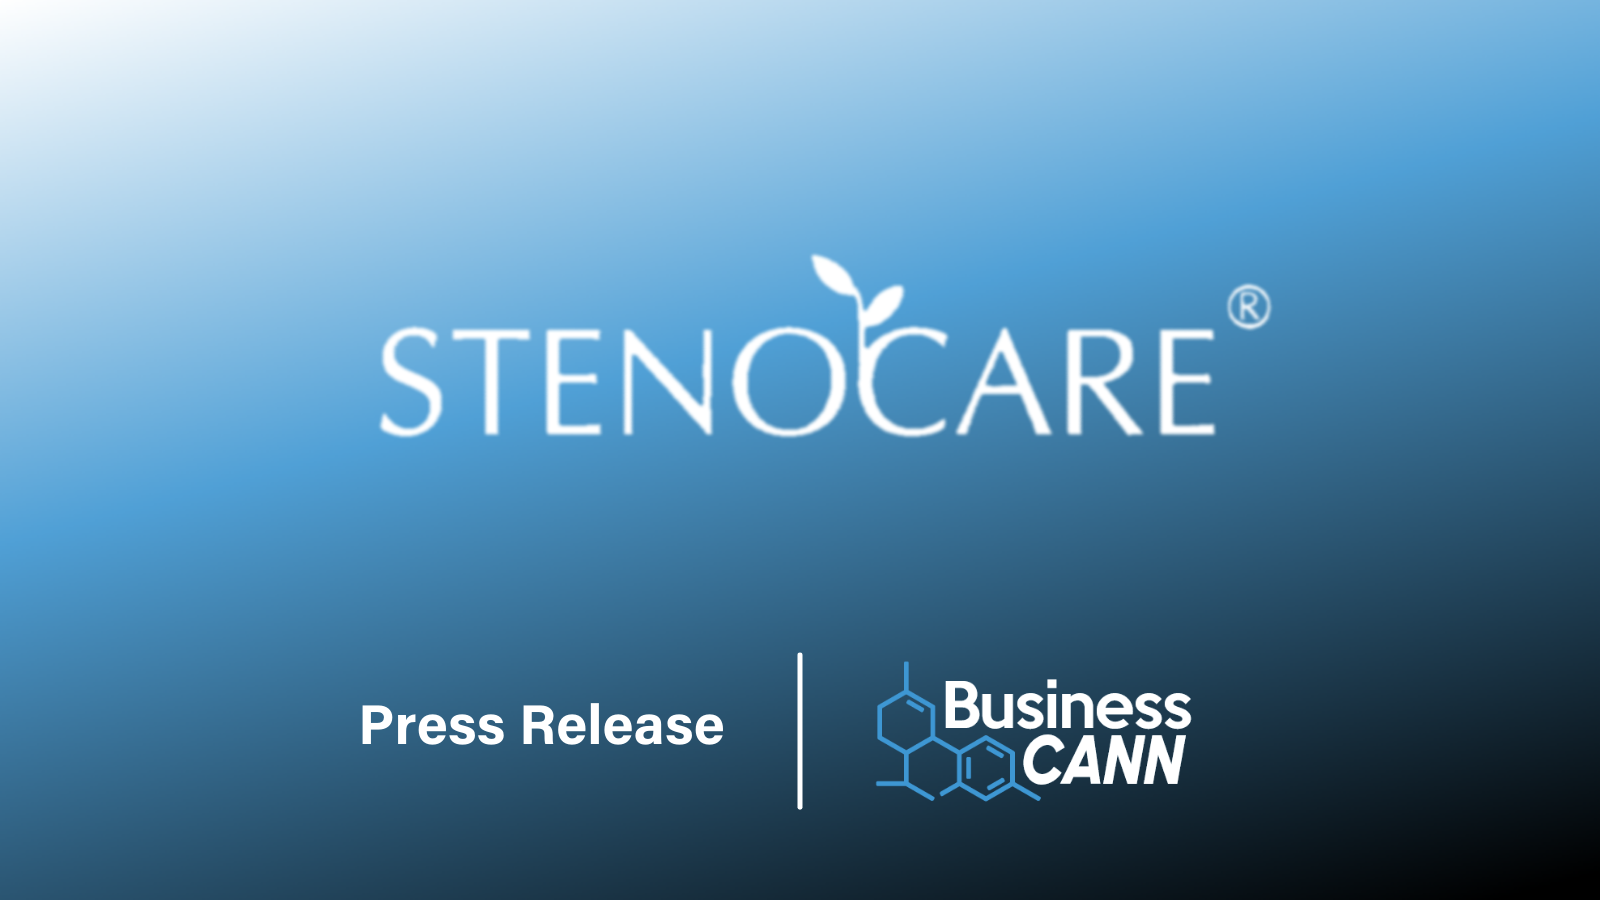 STENOCARE entered three new countries during 2022, and thereby expanded their market presence to five countries with prescription-based medical cannabis oil products approved for sale. With this, Stenocare is in a unique positive position to grow its revenue.